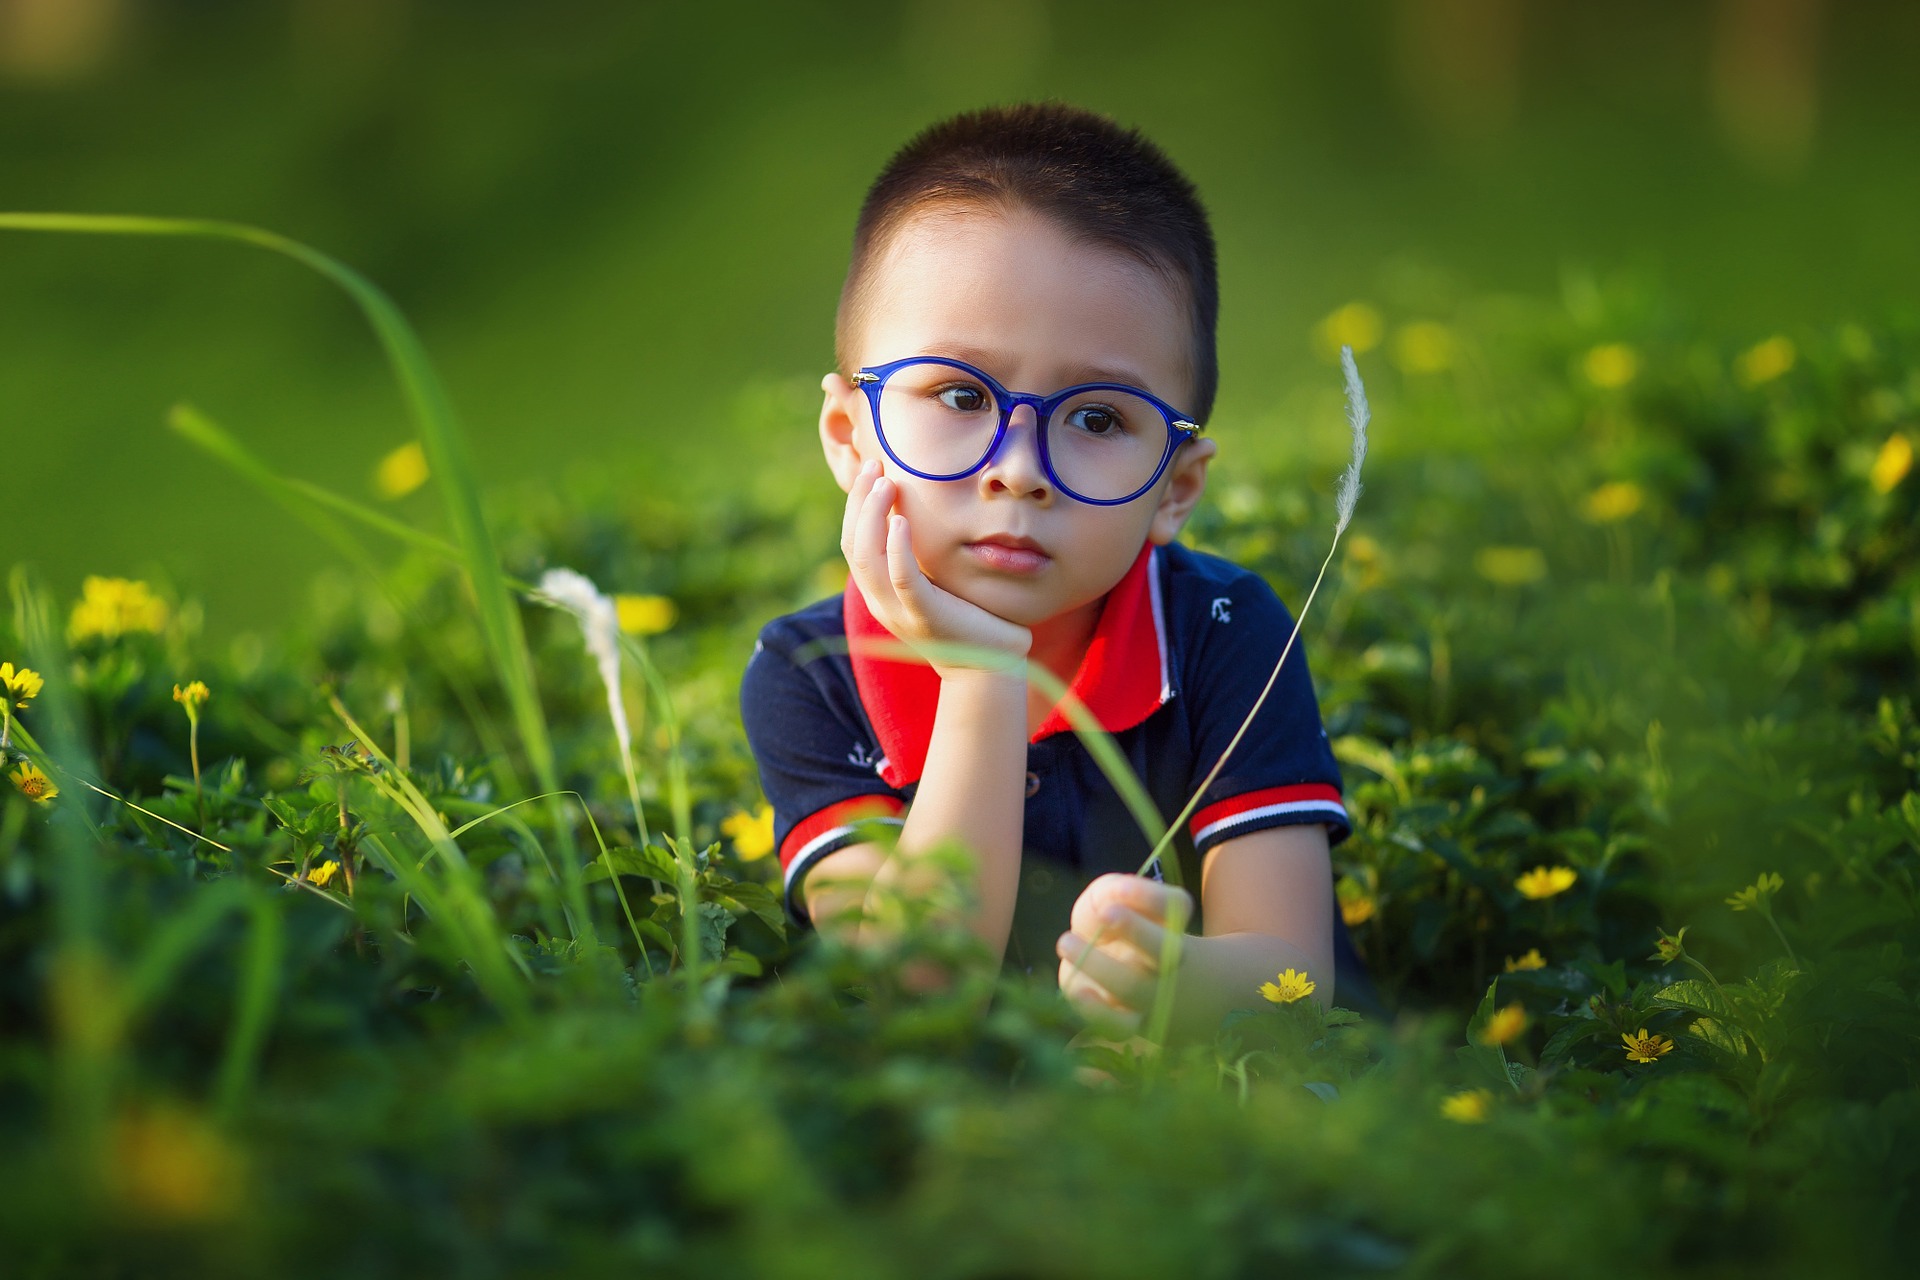 Child wearing spectacles, daydreaming in a field